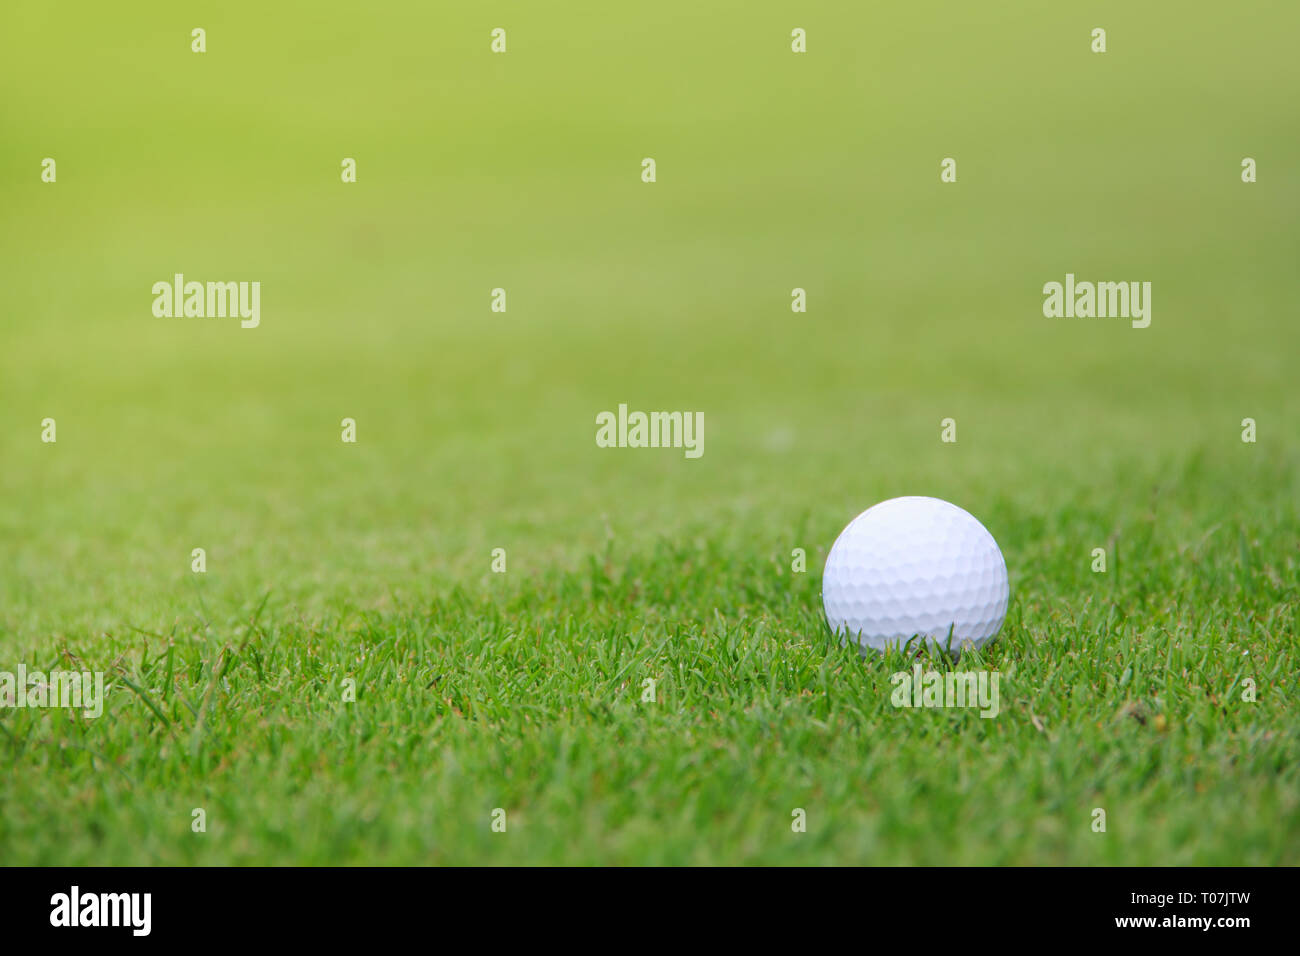 Golf ball on green grass of course close-up view Stock Photo